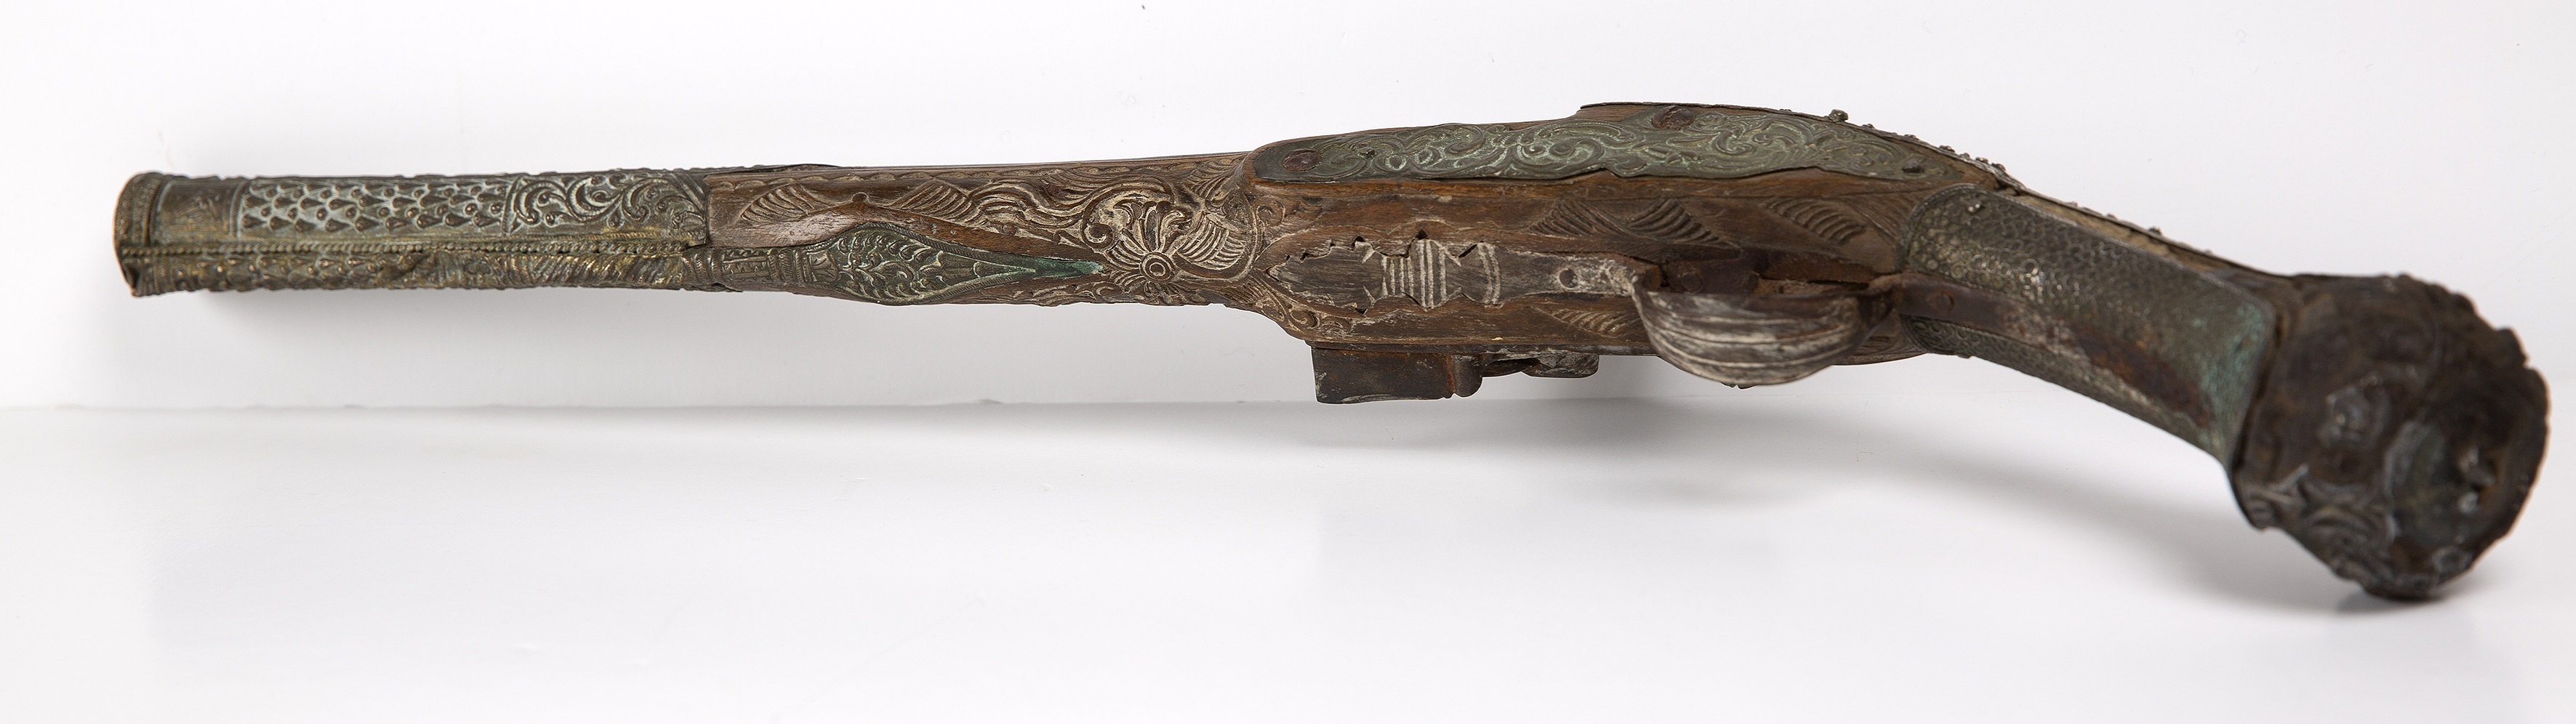 Flintlock pistol Turkish, 19th Century with brass mounts, decorated with a scrolling foliage-style - Image 5 of 5